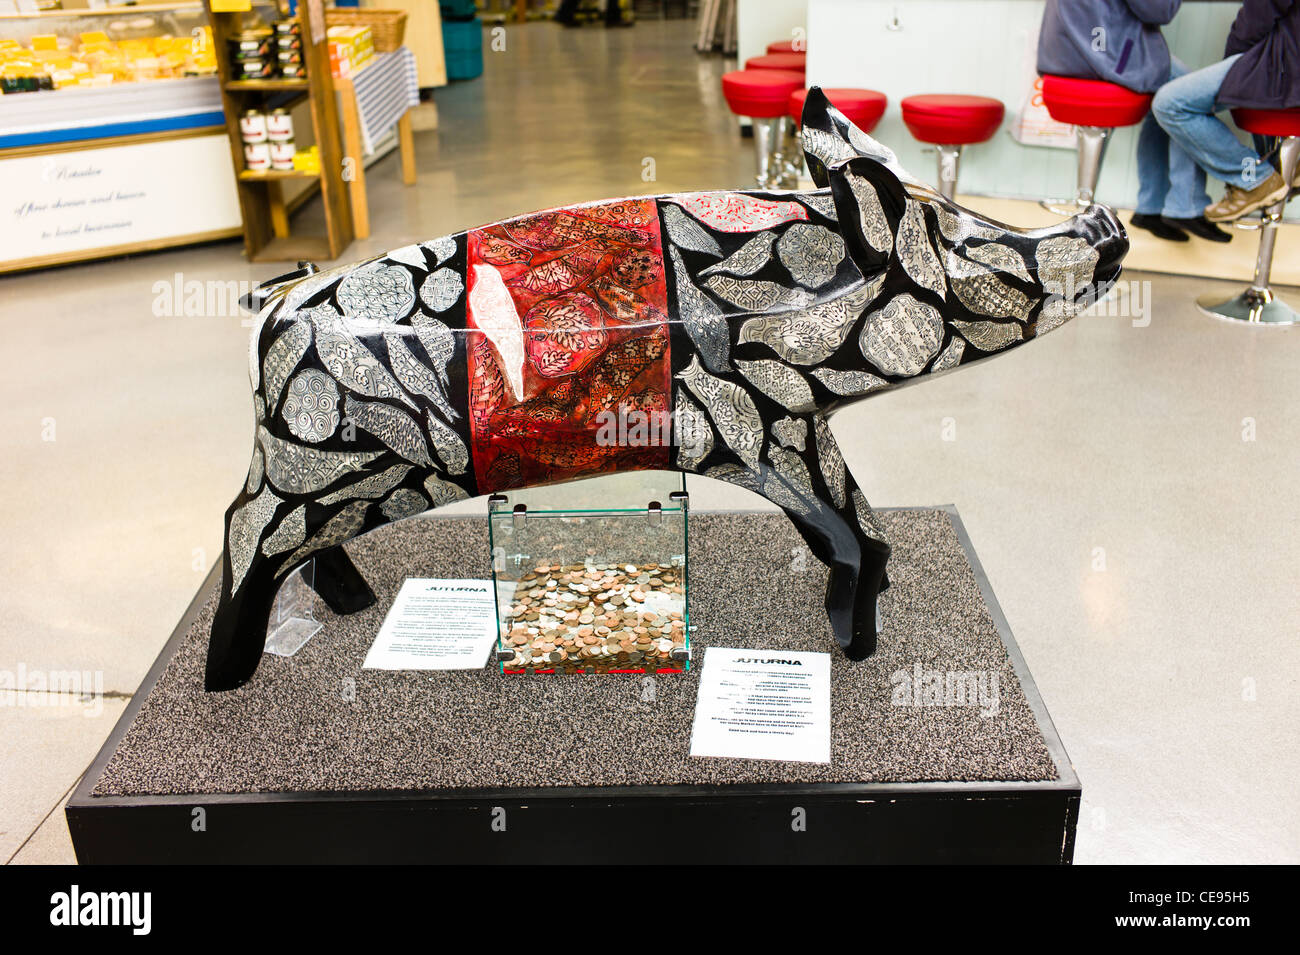 Decorated wooden pig as fund-raiser in small market Stock Photo